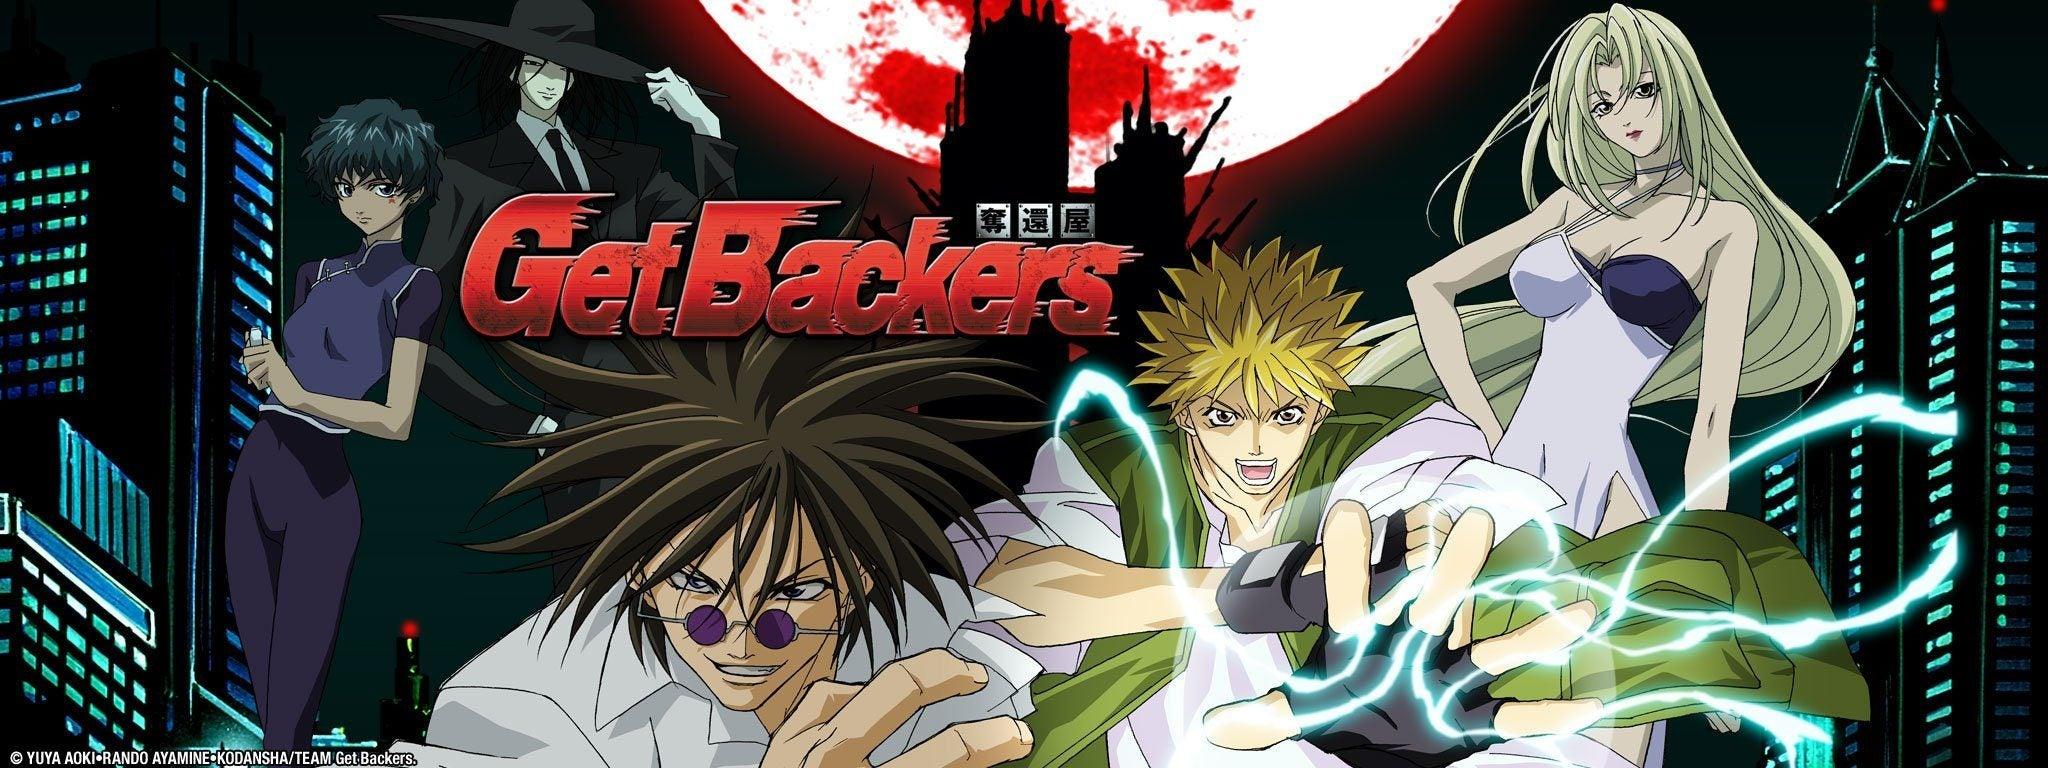 Get Backers (2002 - 2003)